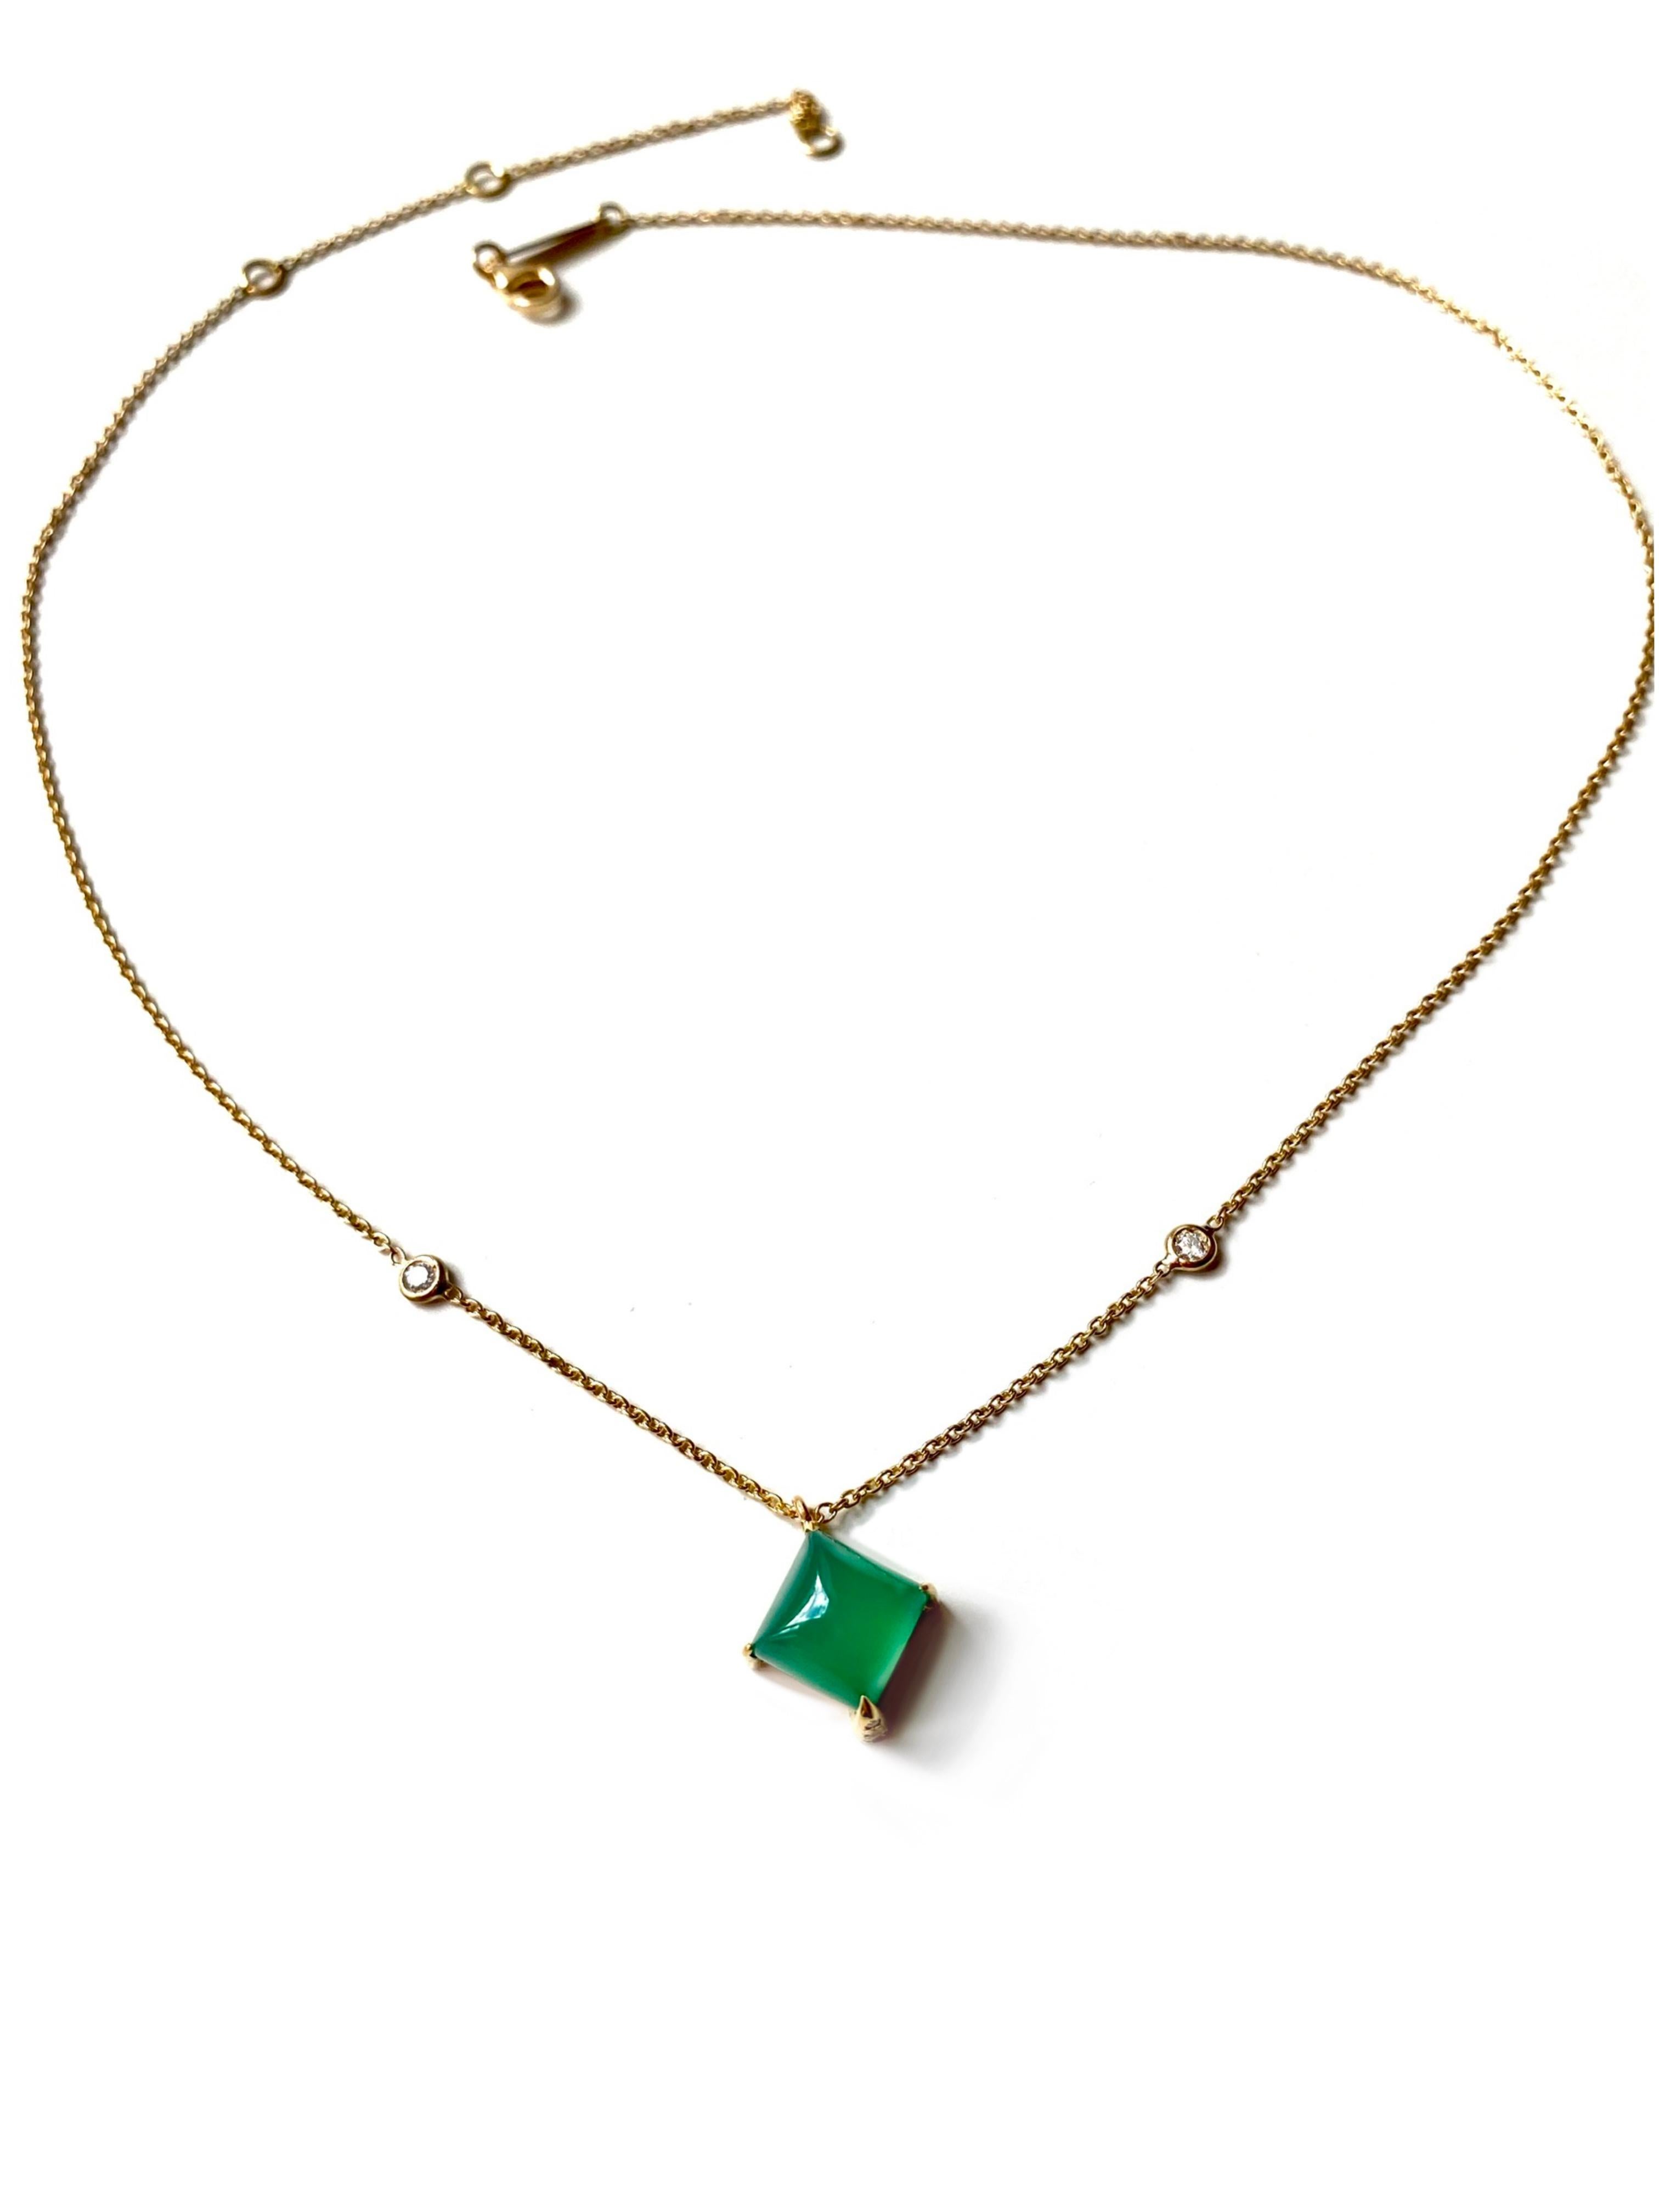 Rossella Ugolini Design Collection Art Deco Style 18 Karat Yellow Gold 0.045 white Diamonds Green Agate Design Chain Necklace Pendant.
Two white Diamonds bezel are located on the chain. In the center, a Sugar Loaf pyramid of bright Green Agate has